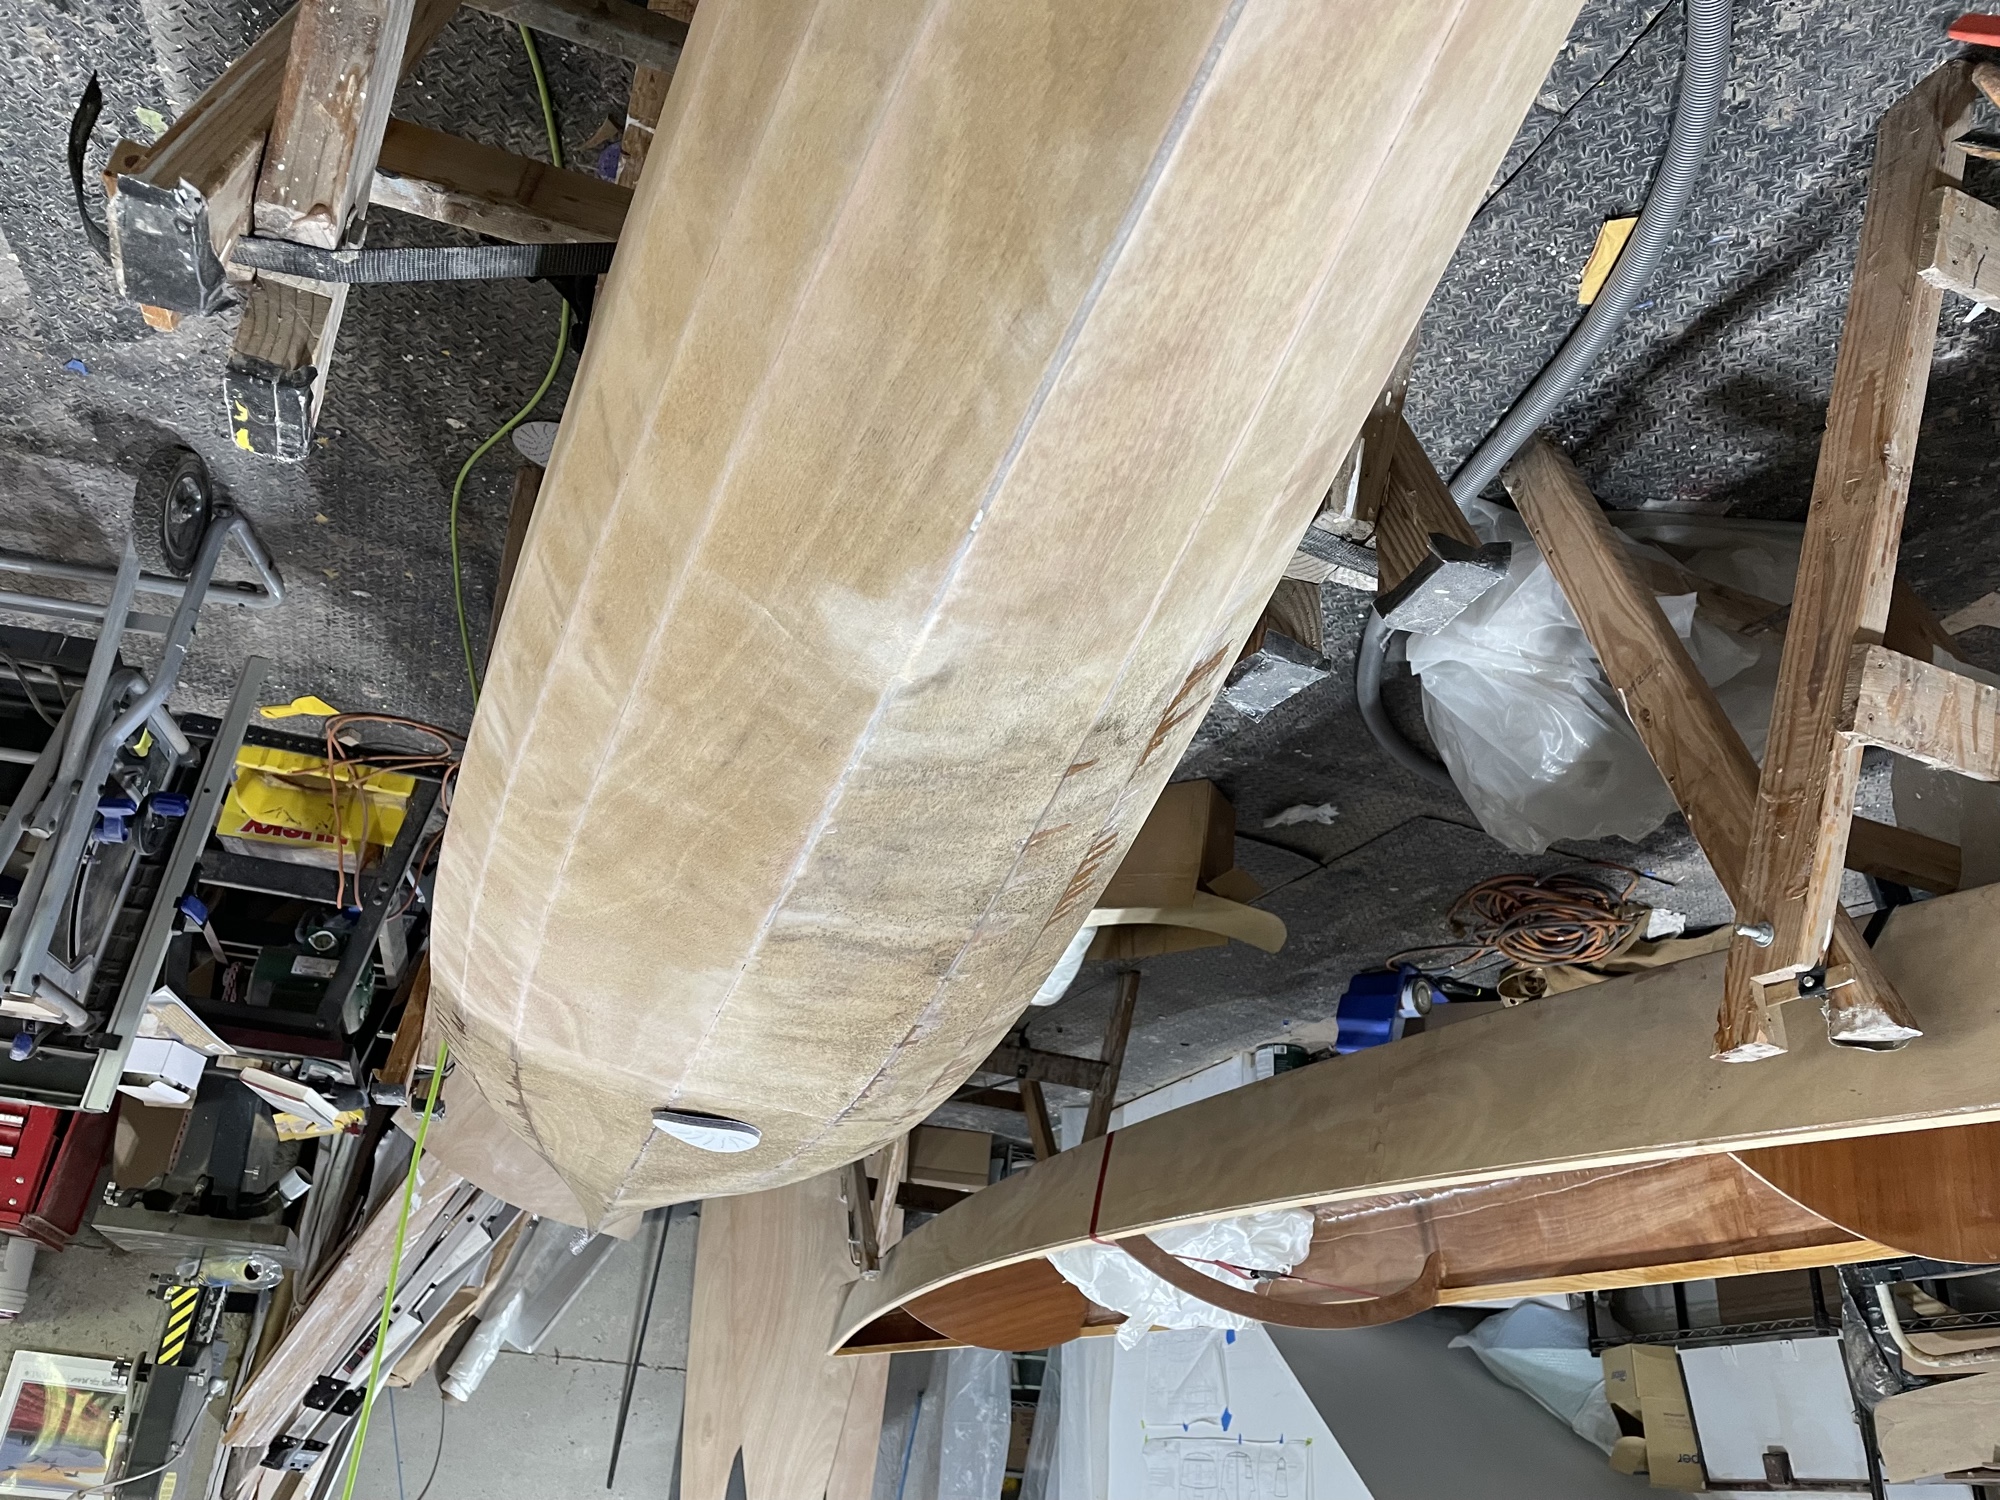  The hull is partially sanded. 